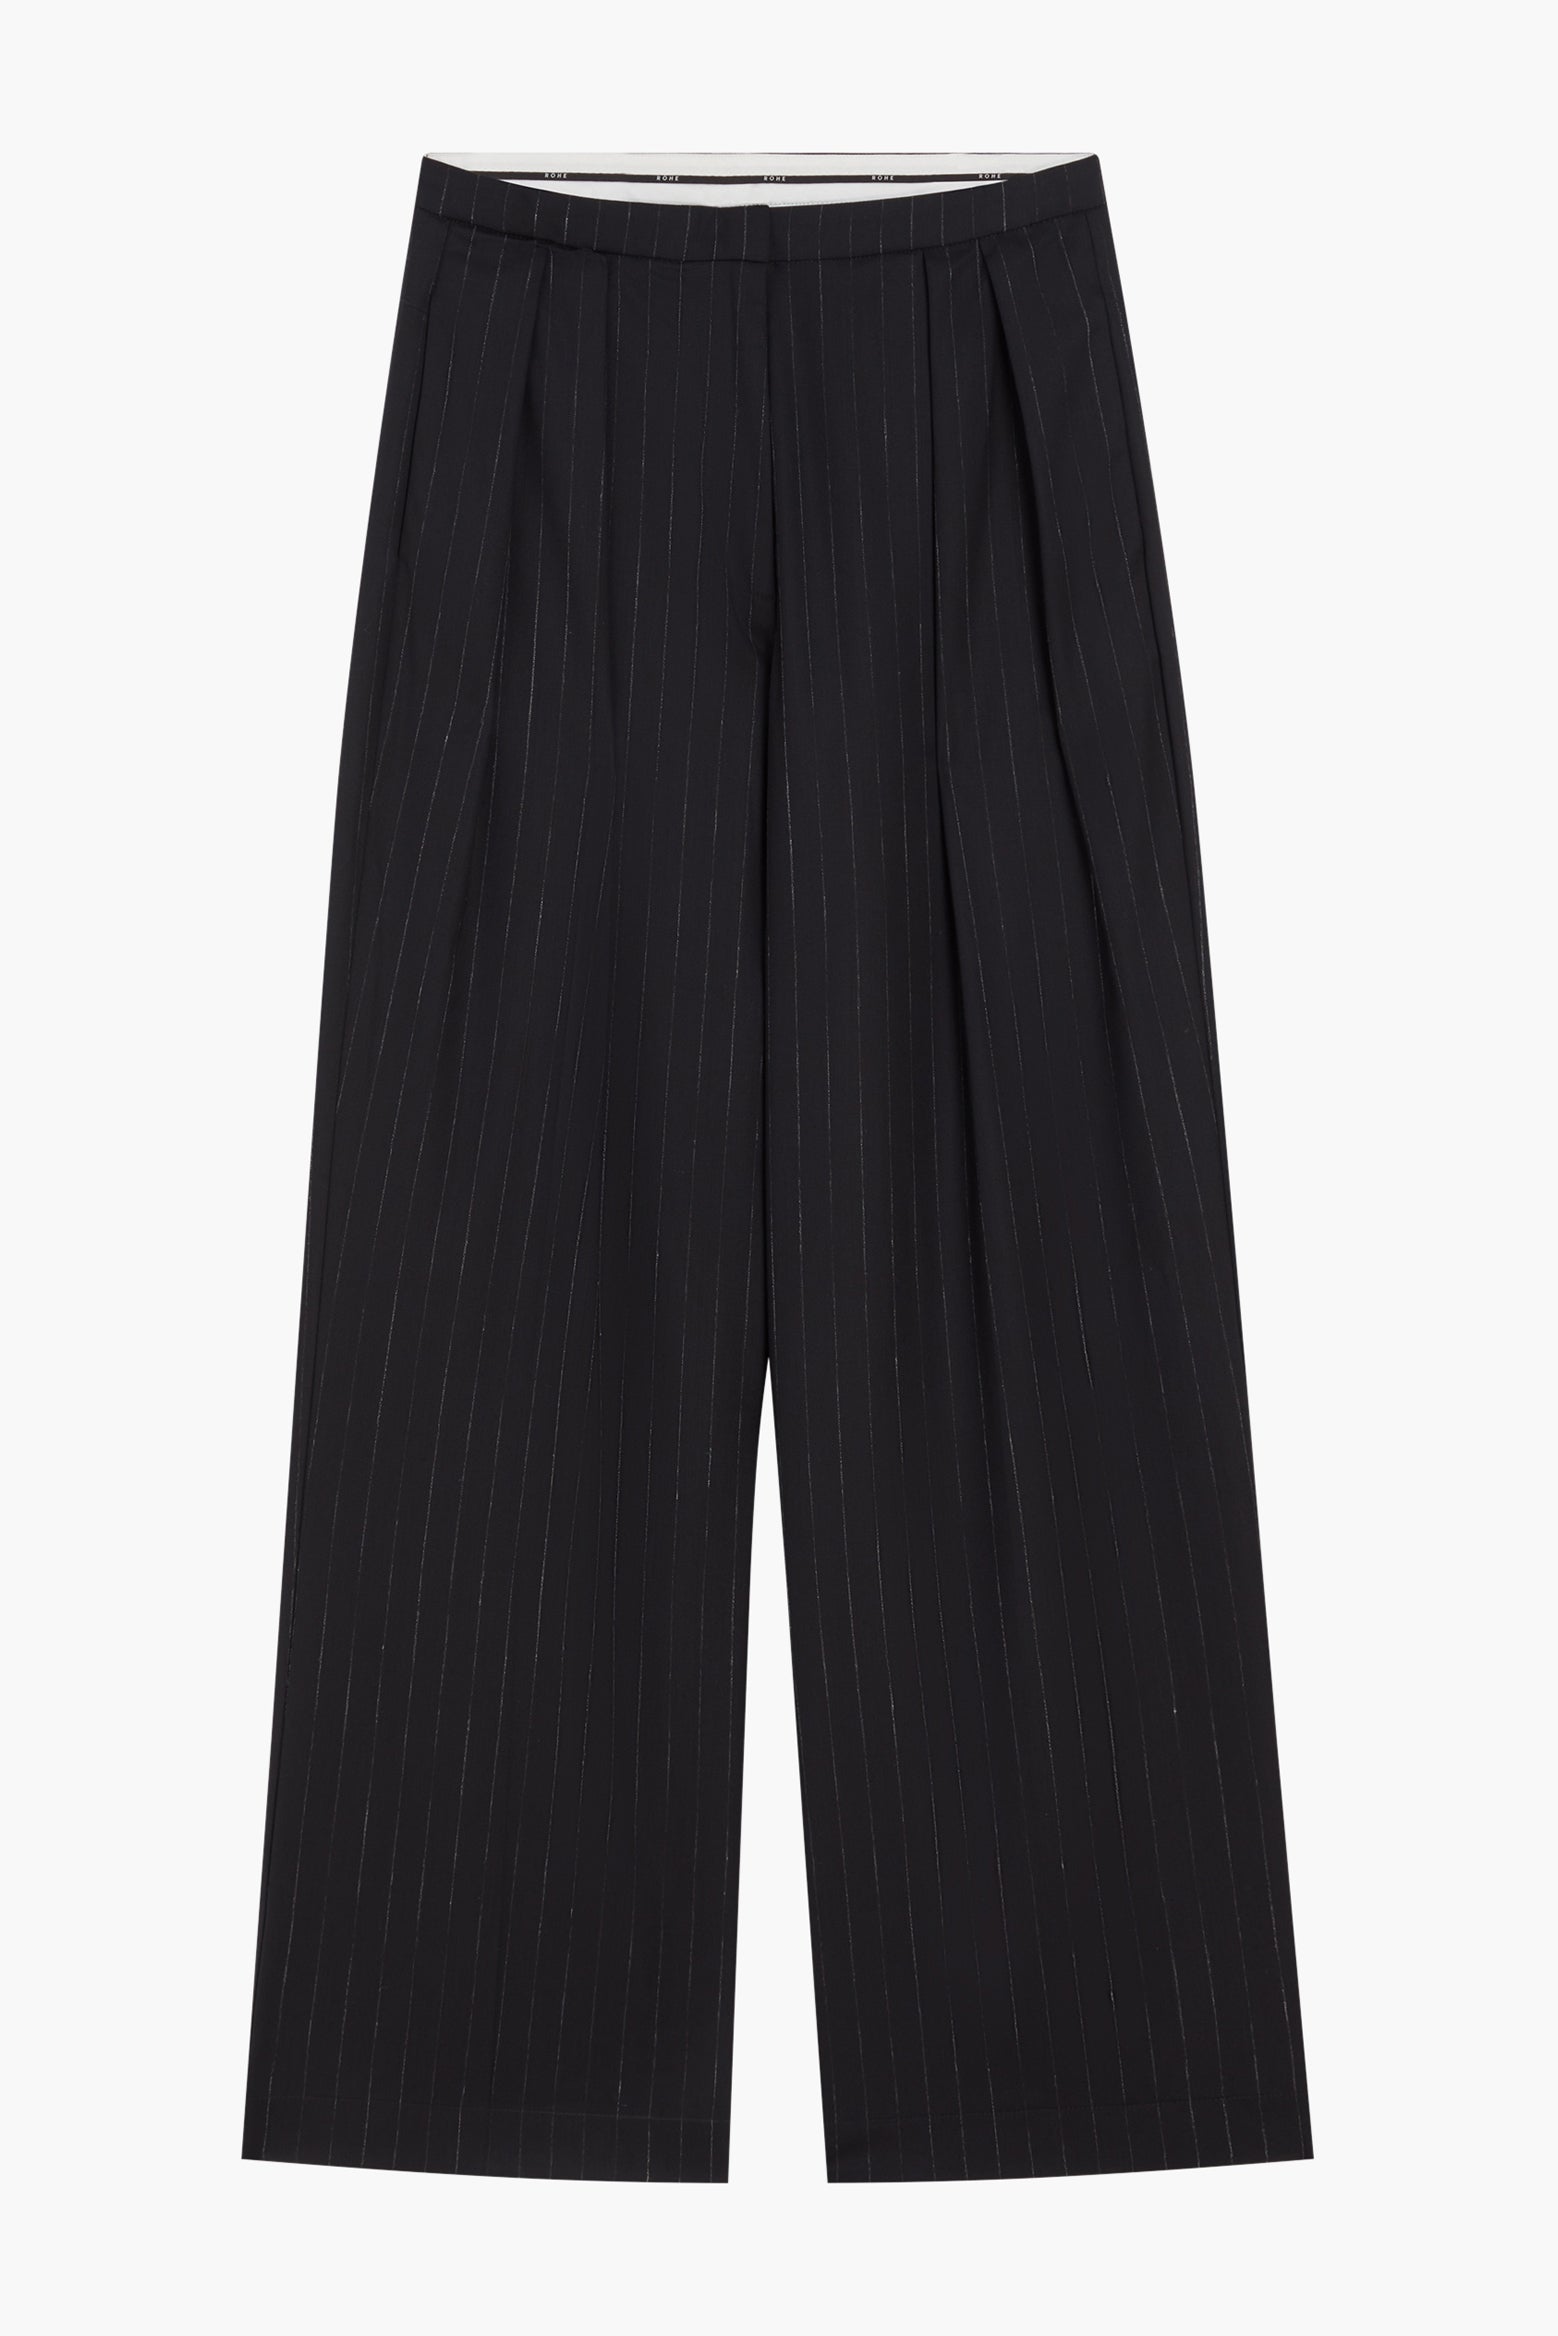 Rohe Wide Leg Pinstripe Trousers in Black/Grey Stripe available at TNT The New Trend Australia